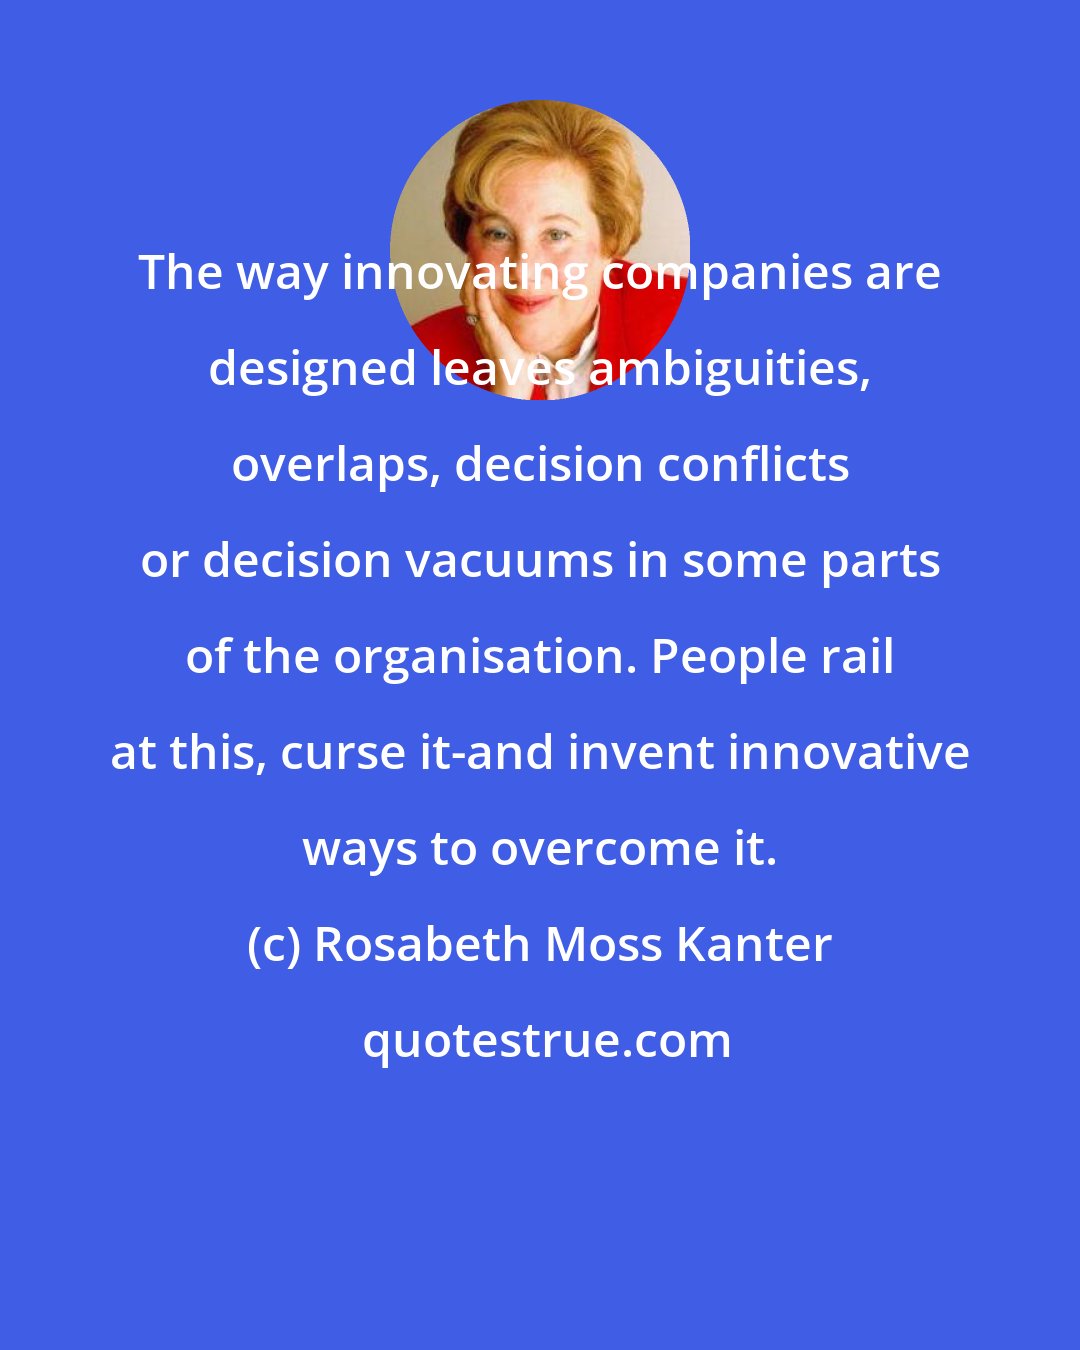 Rosabeth Moss Kanter: The way innovating companies are designed leaves ambiguities, overlaps, decision conflicts or decision vacuums in some parts of the organisation. People rail at this, curse it-and invent innovative ways to overcome it.